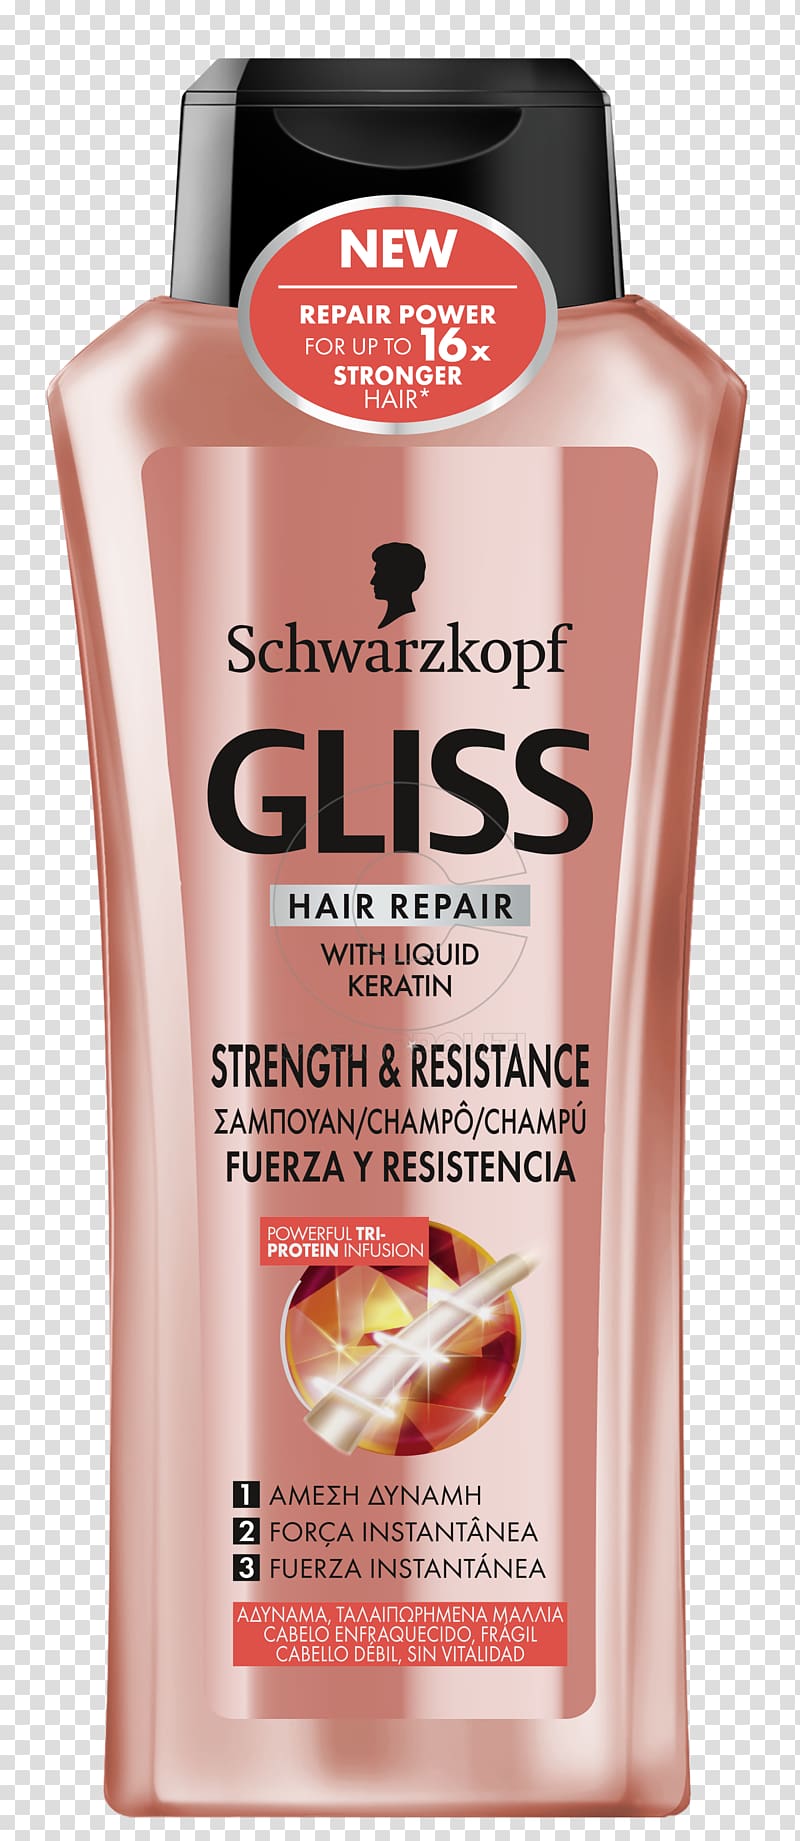 Lotion Schwarzkopf Gliss Ultimate Repair Shampoo Schwarzkopf Gliss Ultimate Repair Shampoo Hair, shampoo transparent background PNG clipart